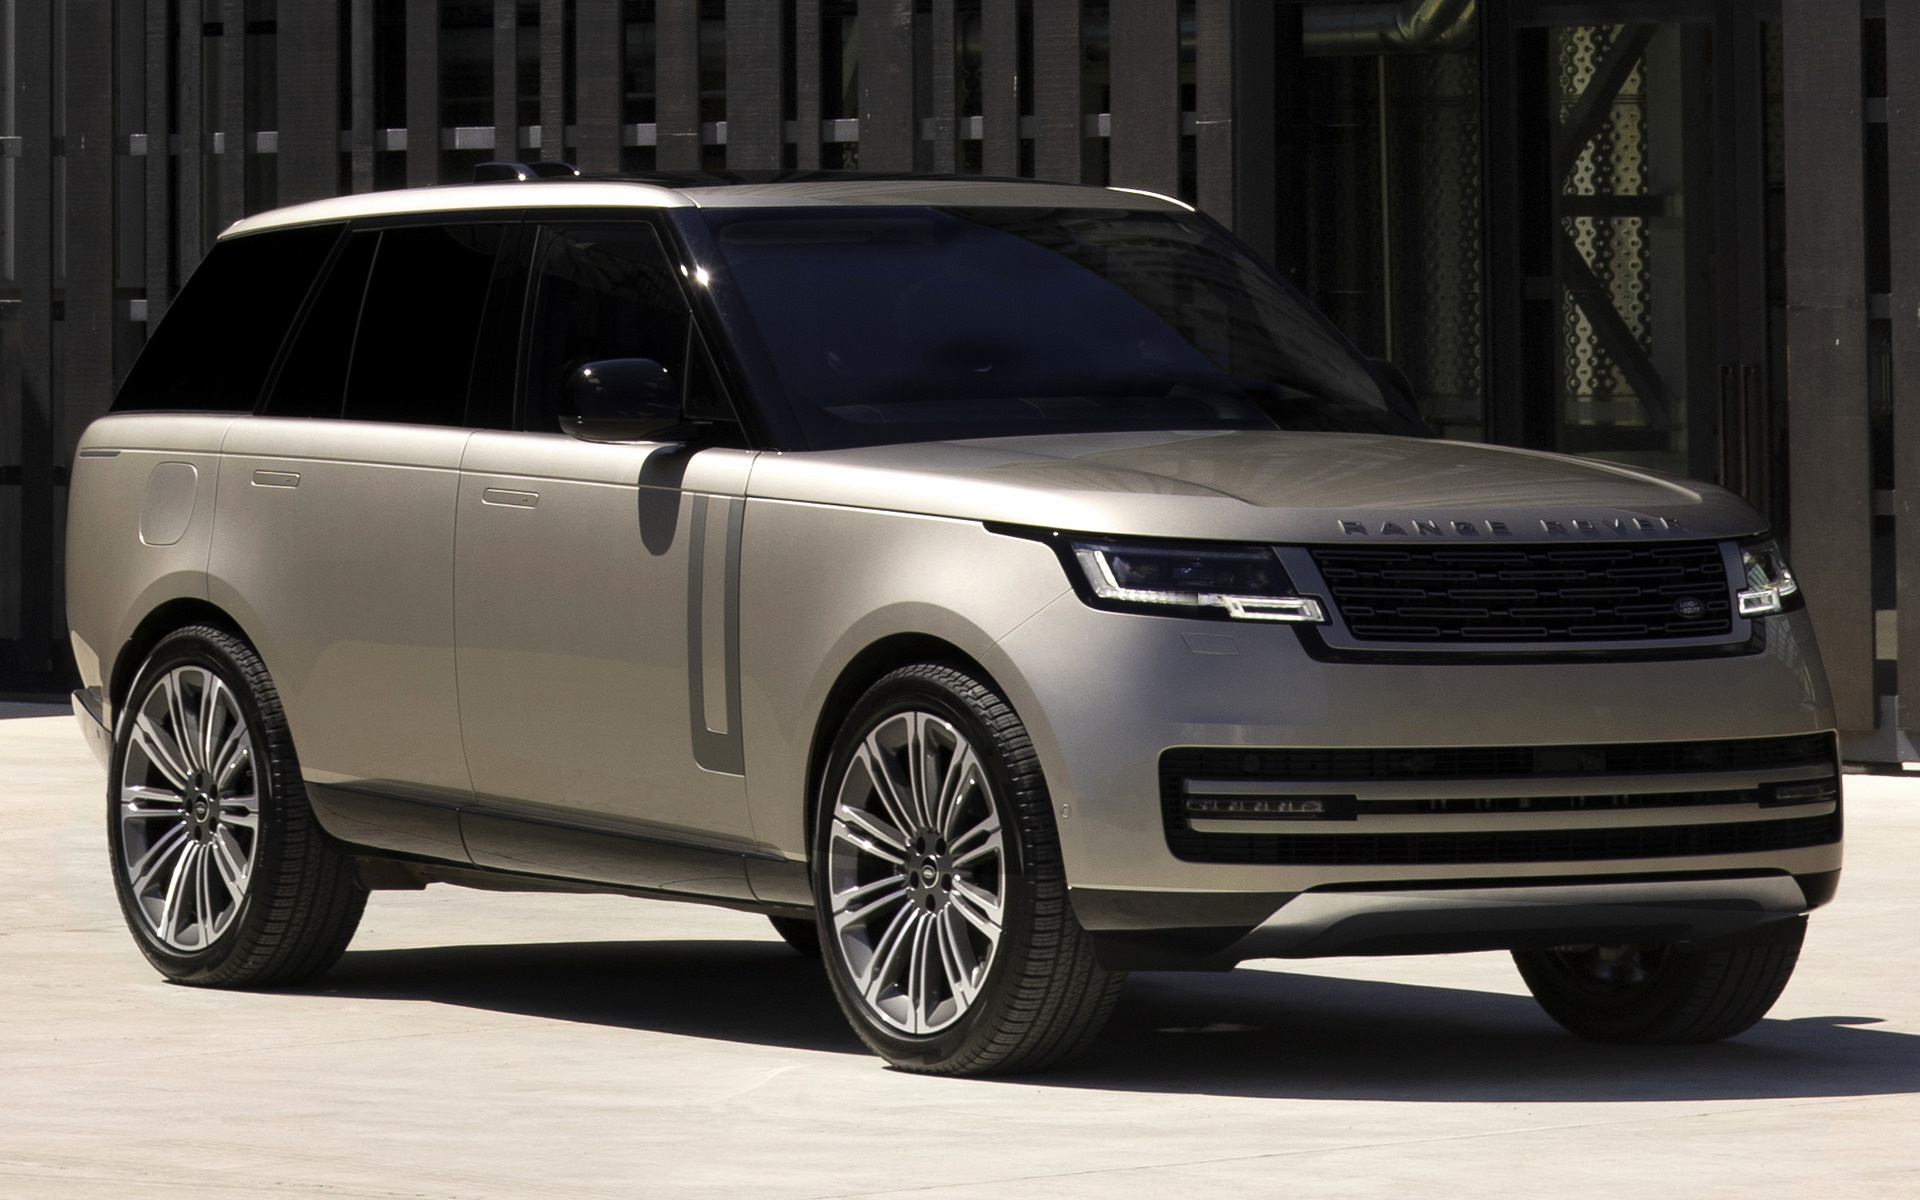 2022 Range Rover - Wallpapers and HD Images | Car Pixel